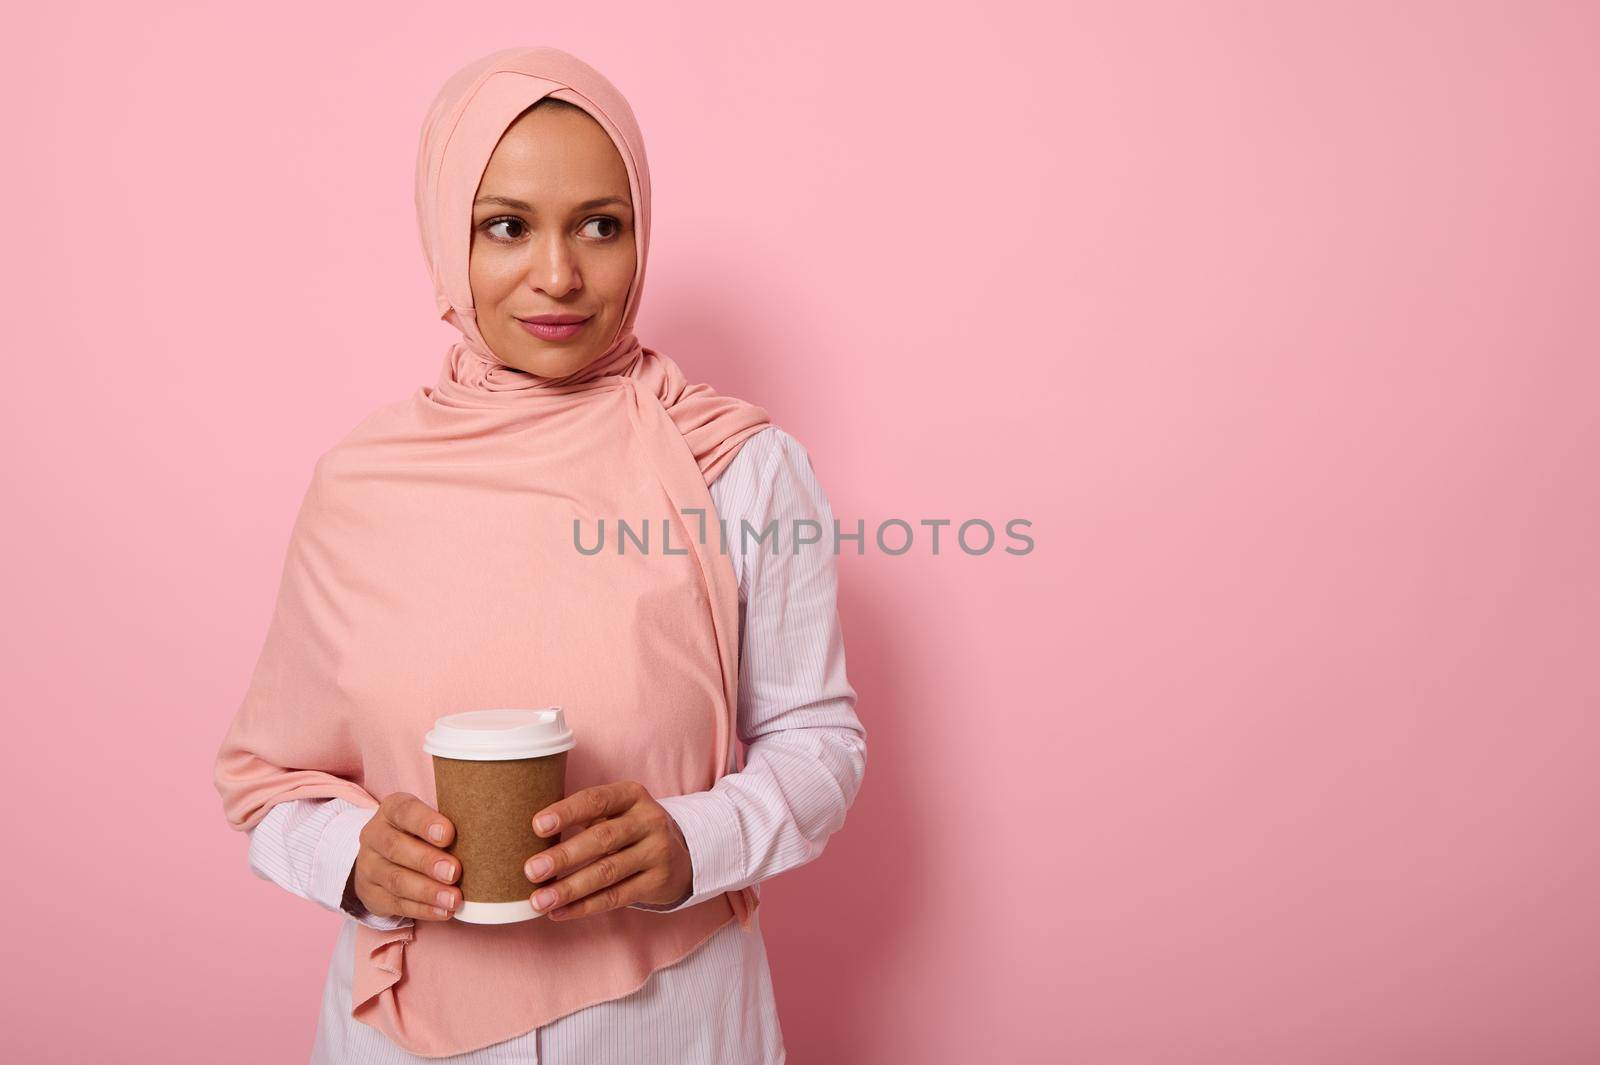 Arab Muslim beautiful woman wearing pink hijab and white shirt holding a recyclable disposable ecological paper mug in her hands, looking the side posing on colored background with copy space by artgf